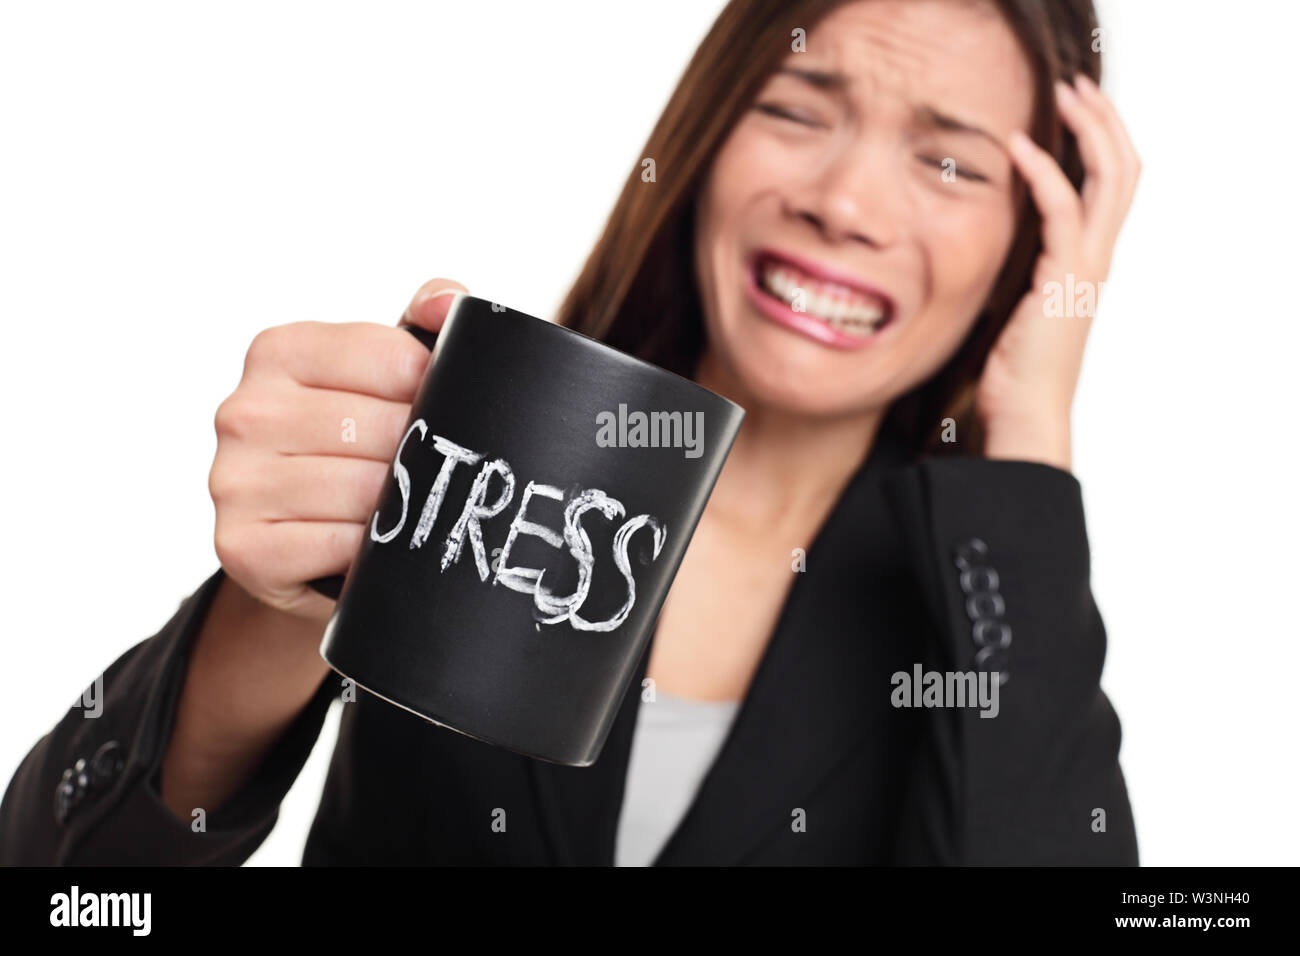 Stress at work concept. Business woman stressed being to busy. Businesswoman in suit holding head drinking coffee creating more stress. Mixed race Asian Caucasian female isolated on white background. Stock Photo